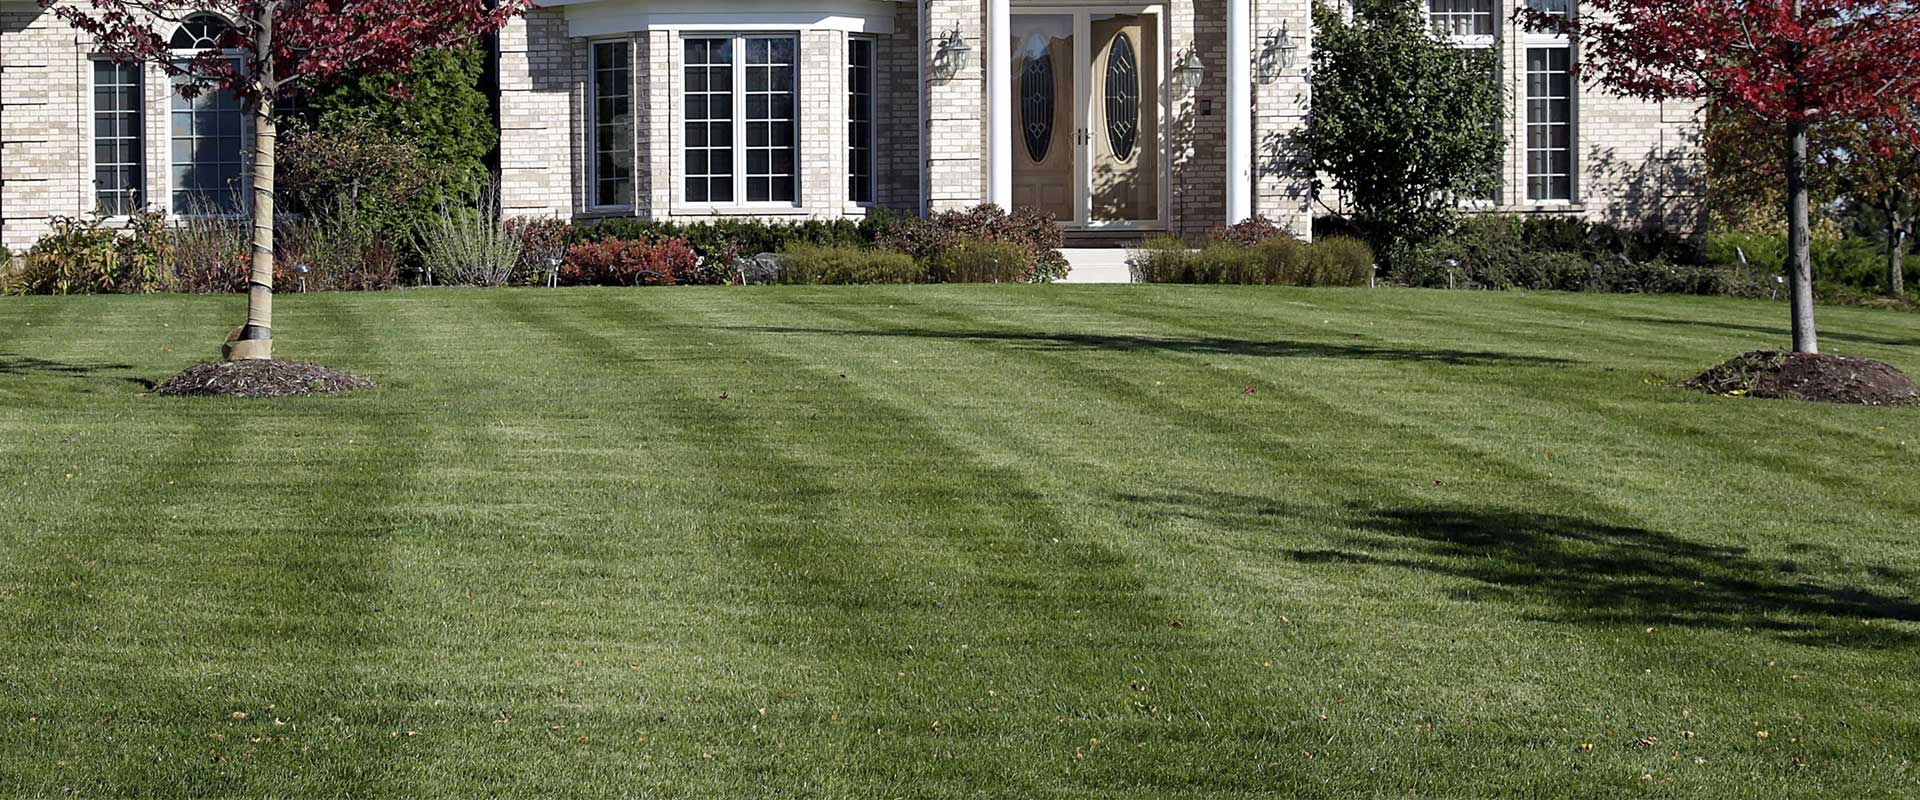 Lawn striping done by our mowing team in front of a home in Rhinebeck.